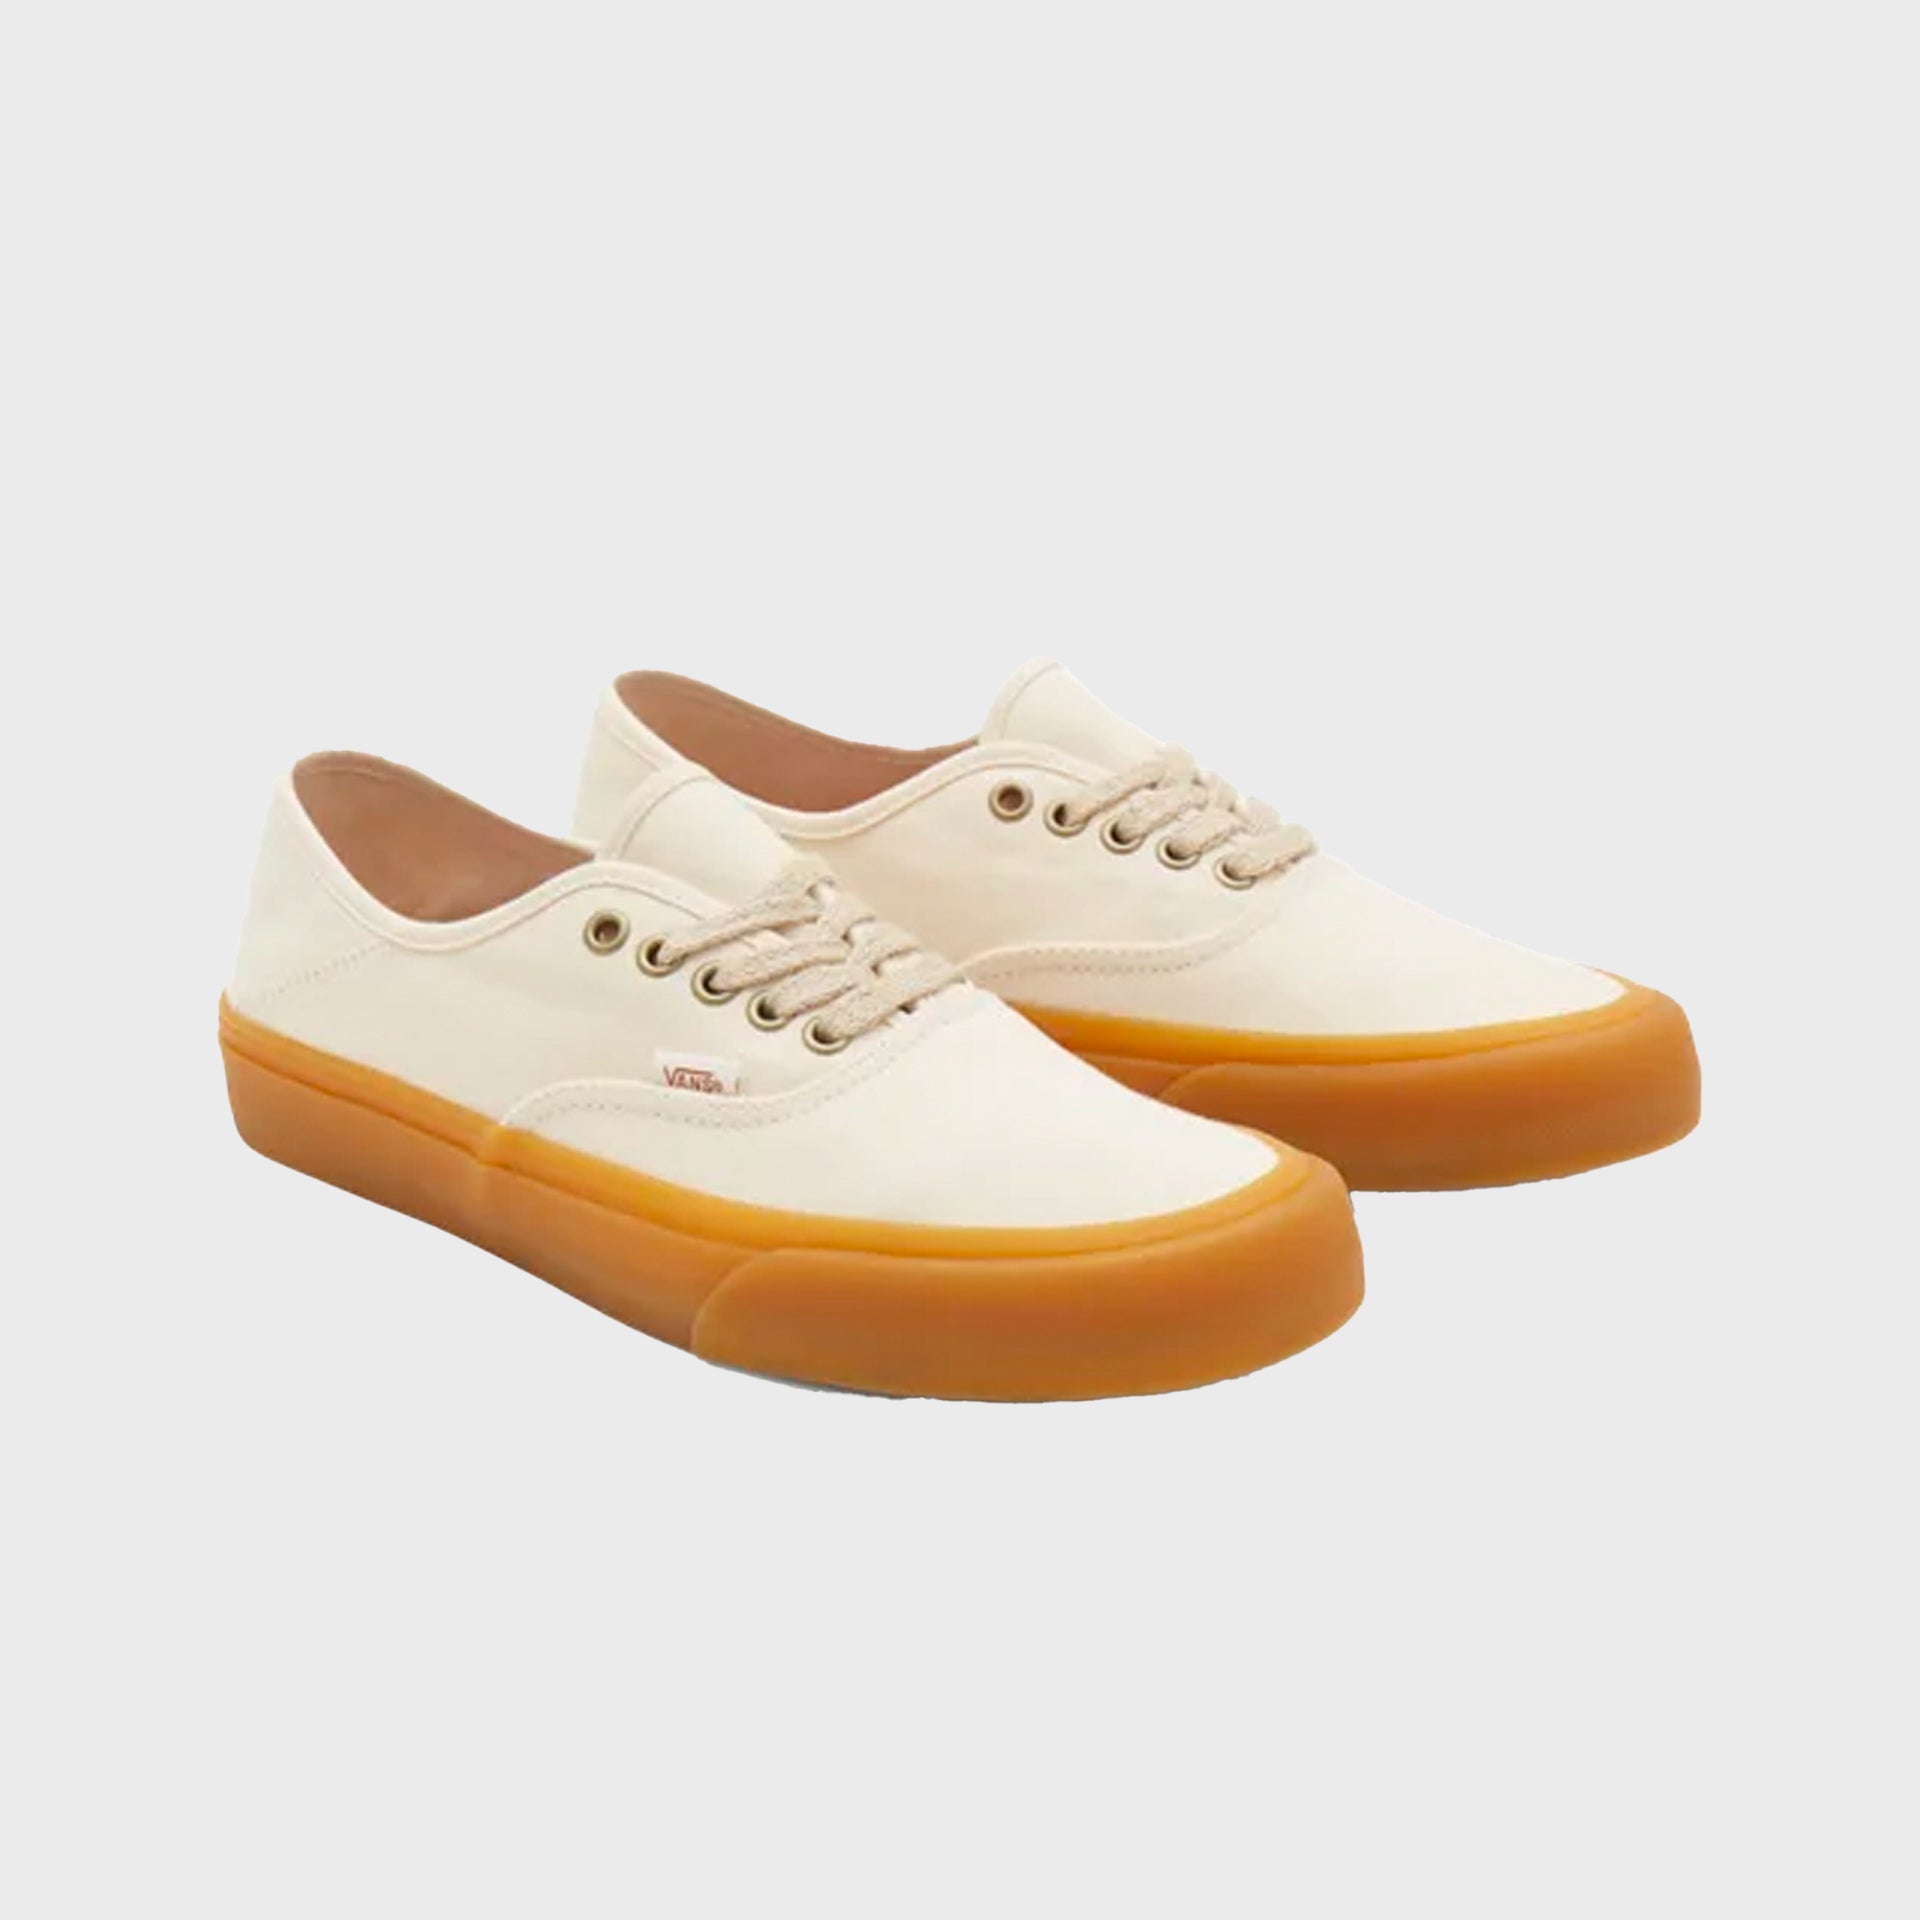 Vans Eco Theory Authentic SF Shoes - Cream - ManGo Surfing